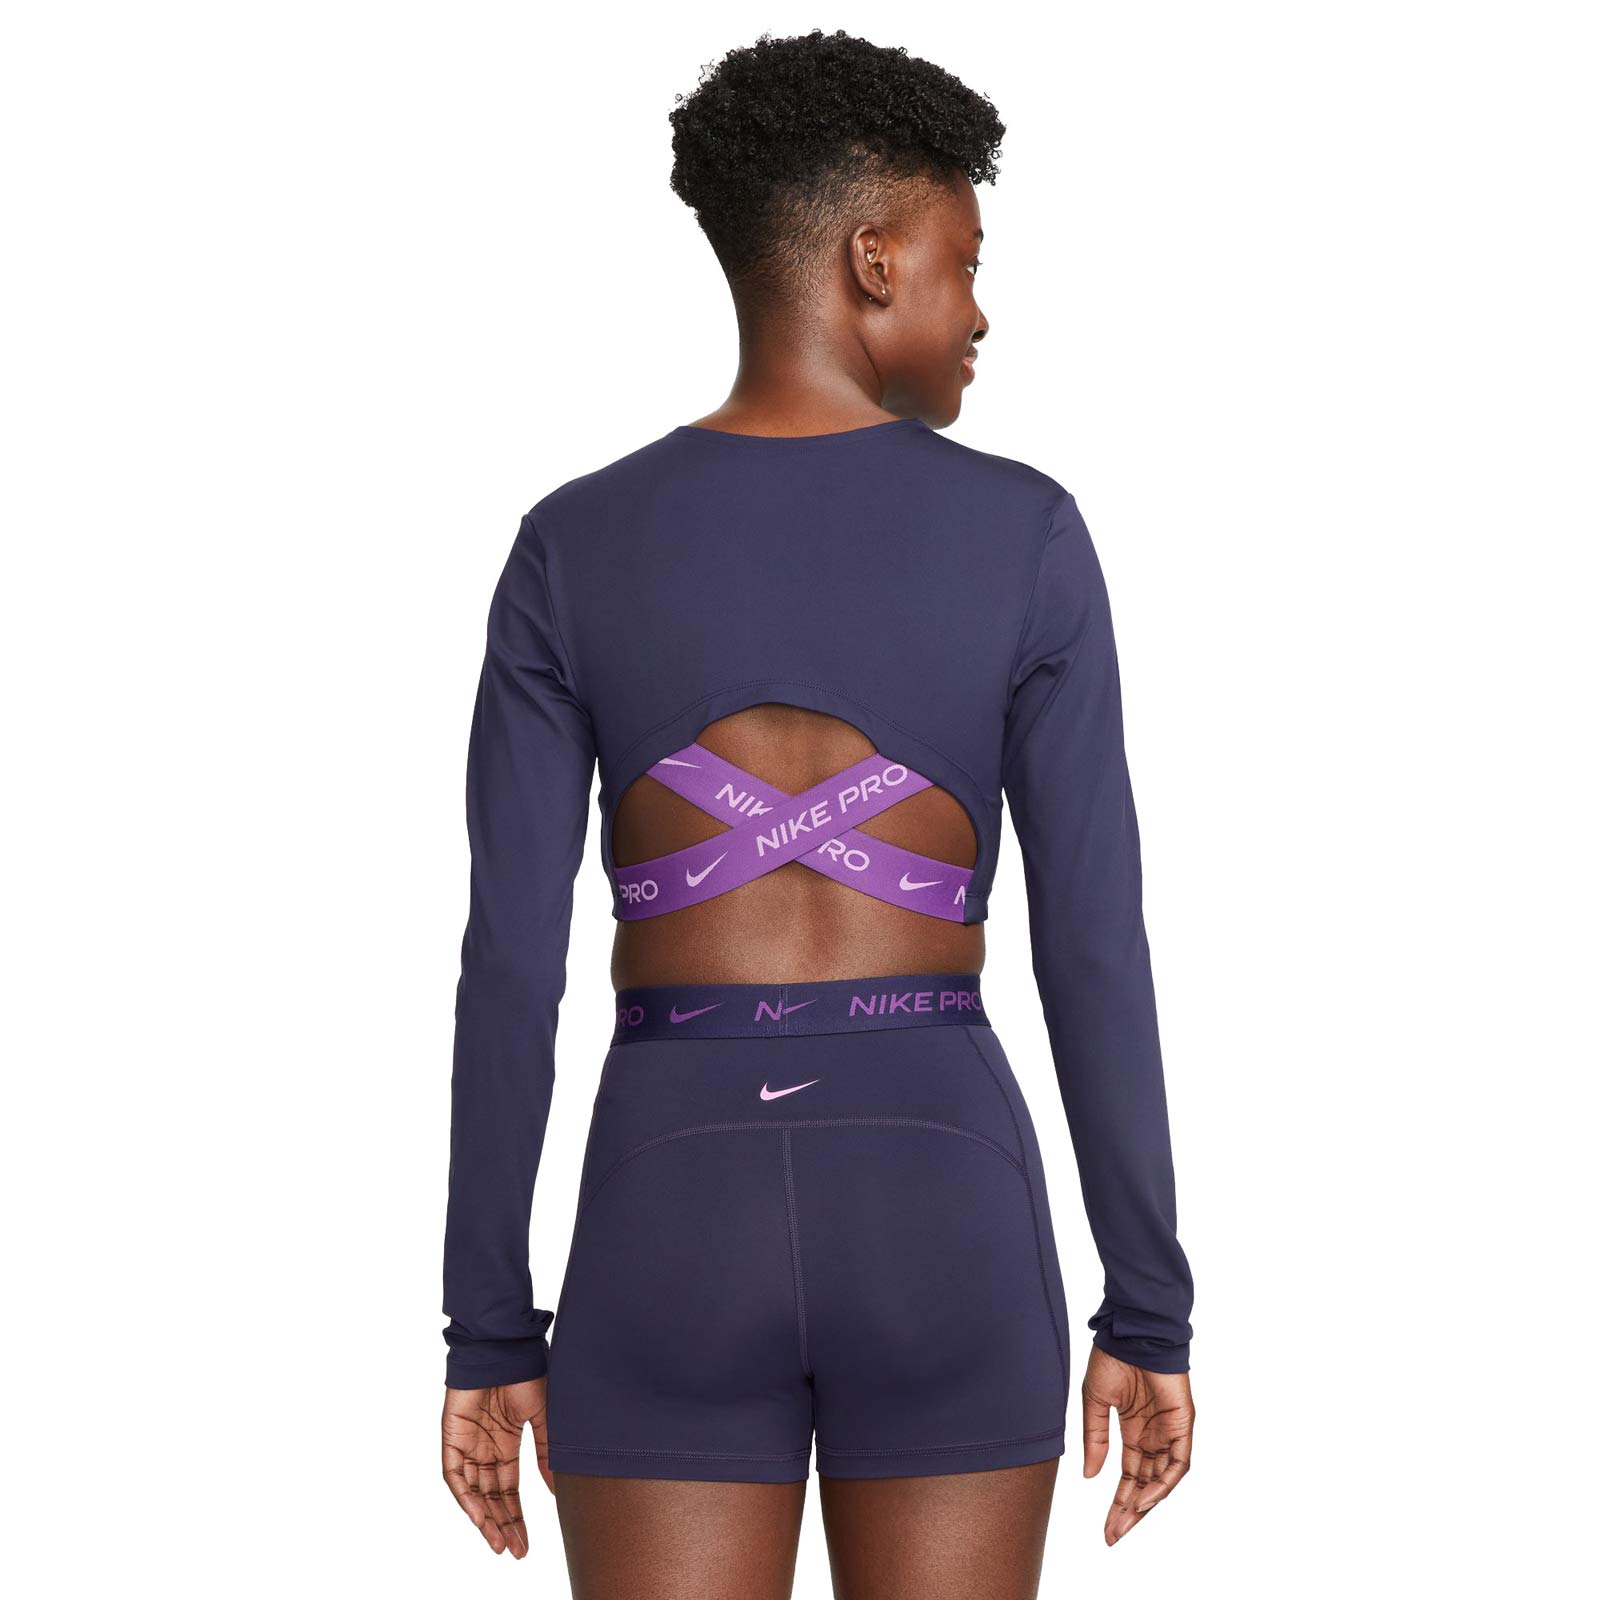 NIKE PRO DRI-FIT WOMENS CROPPED LONG-SLEEVE TOP